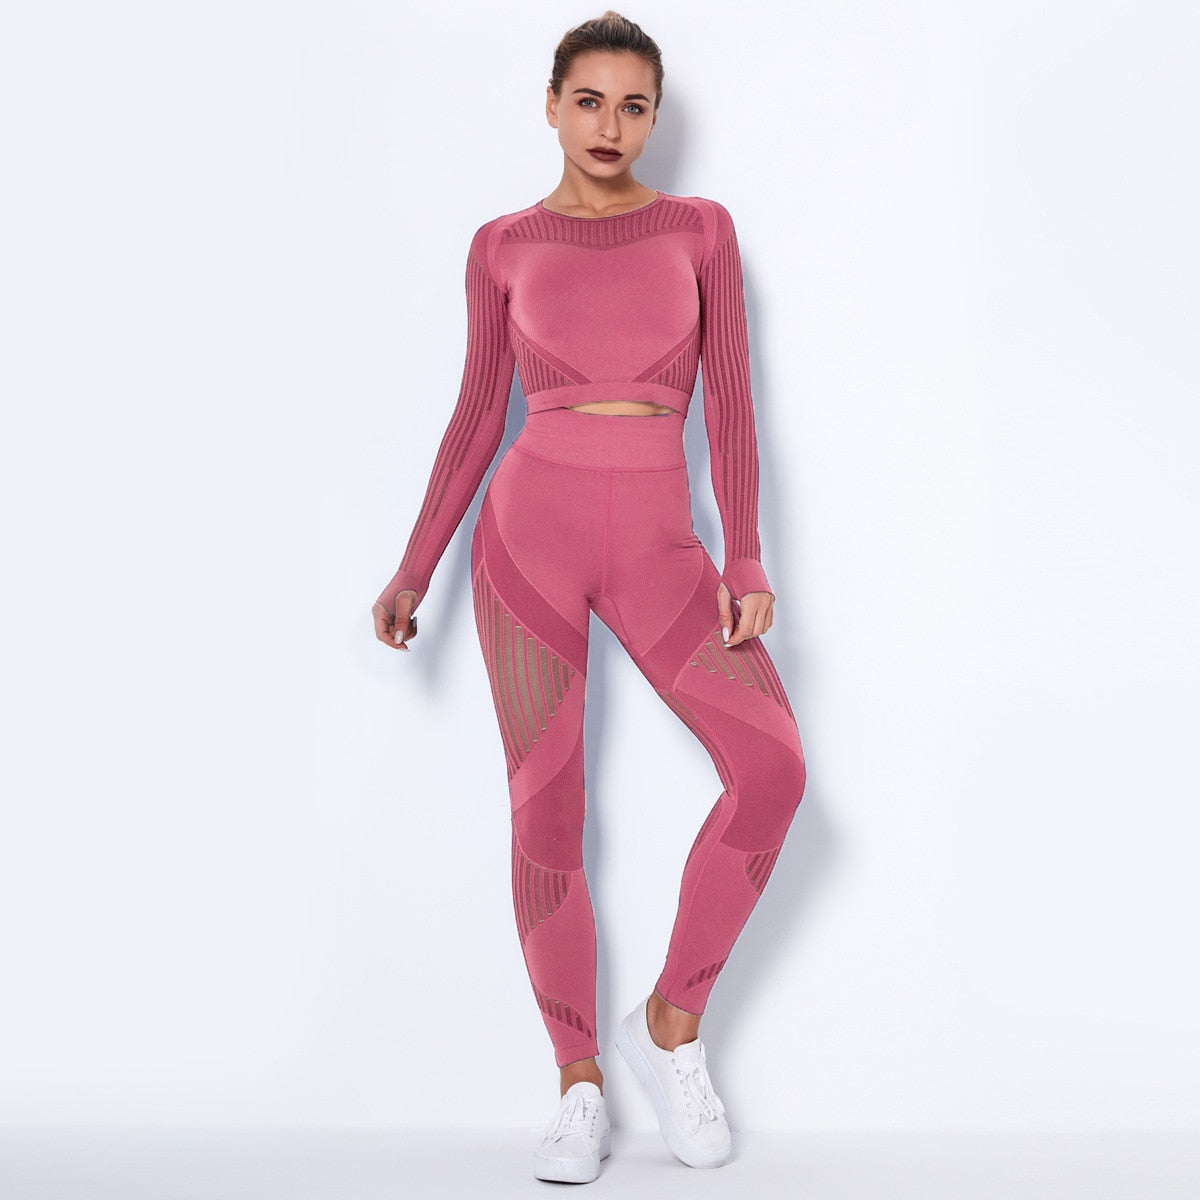 Workout Sets For Women 2 Piece Seamless Yoga Outfit Tracksuit High Waisted Yoga Leggings And Crop Top Gym Clothes Set pinkL  109.99 EZYSELLA SHOP